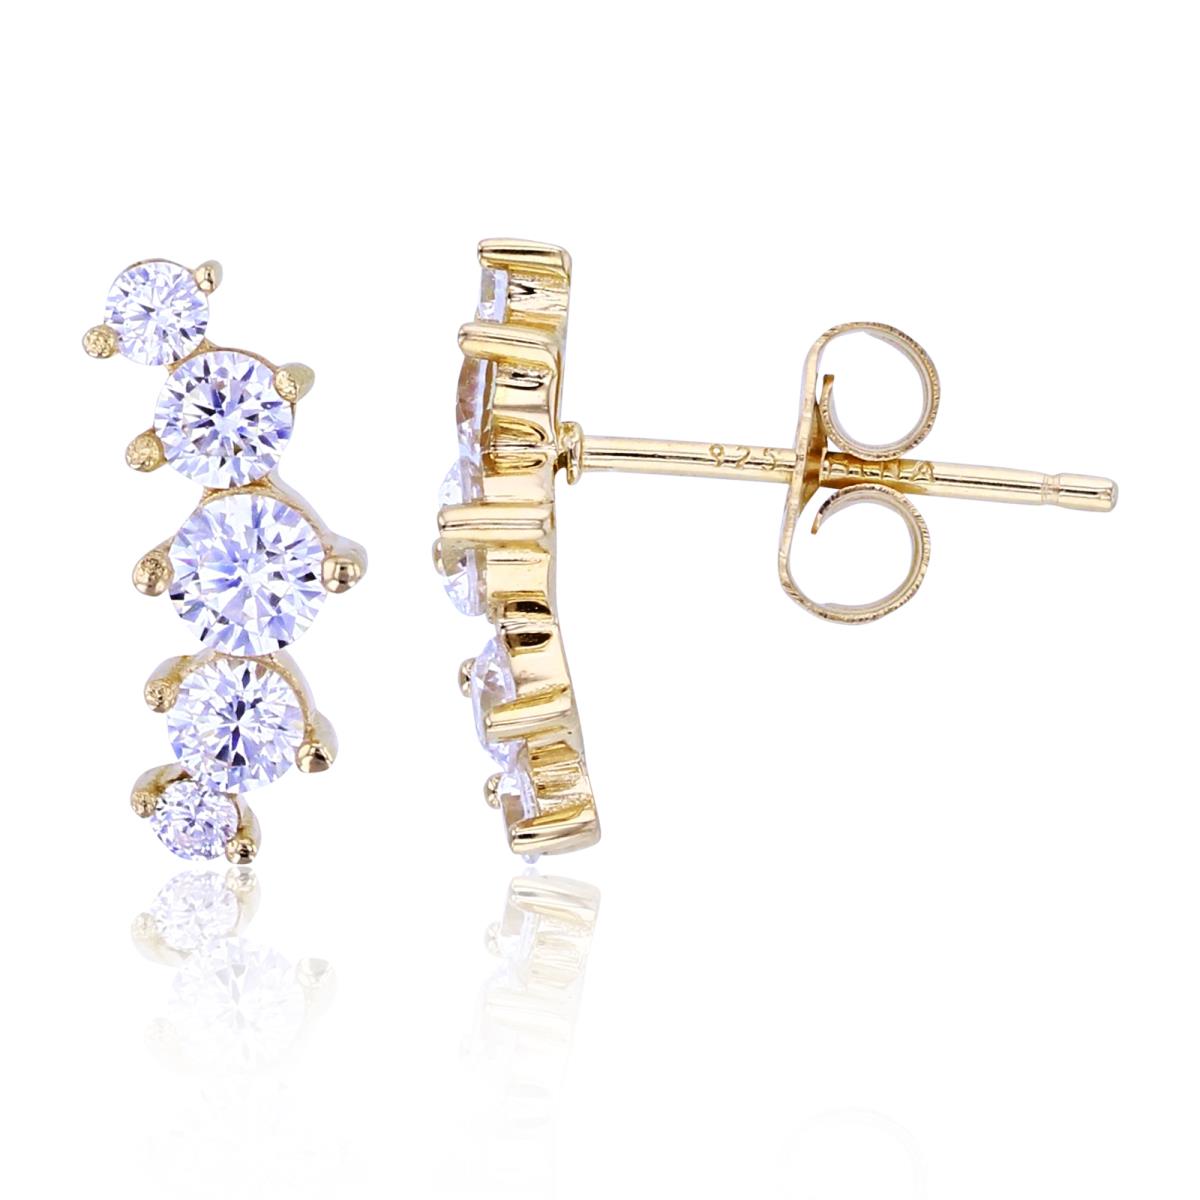 Sterling Silver+1Micron Yellow Gold Rnd CZ Crawl Earrings